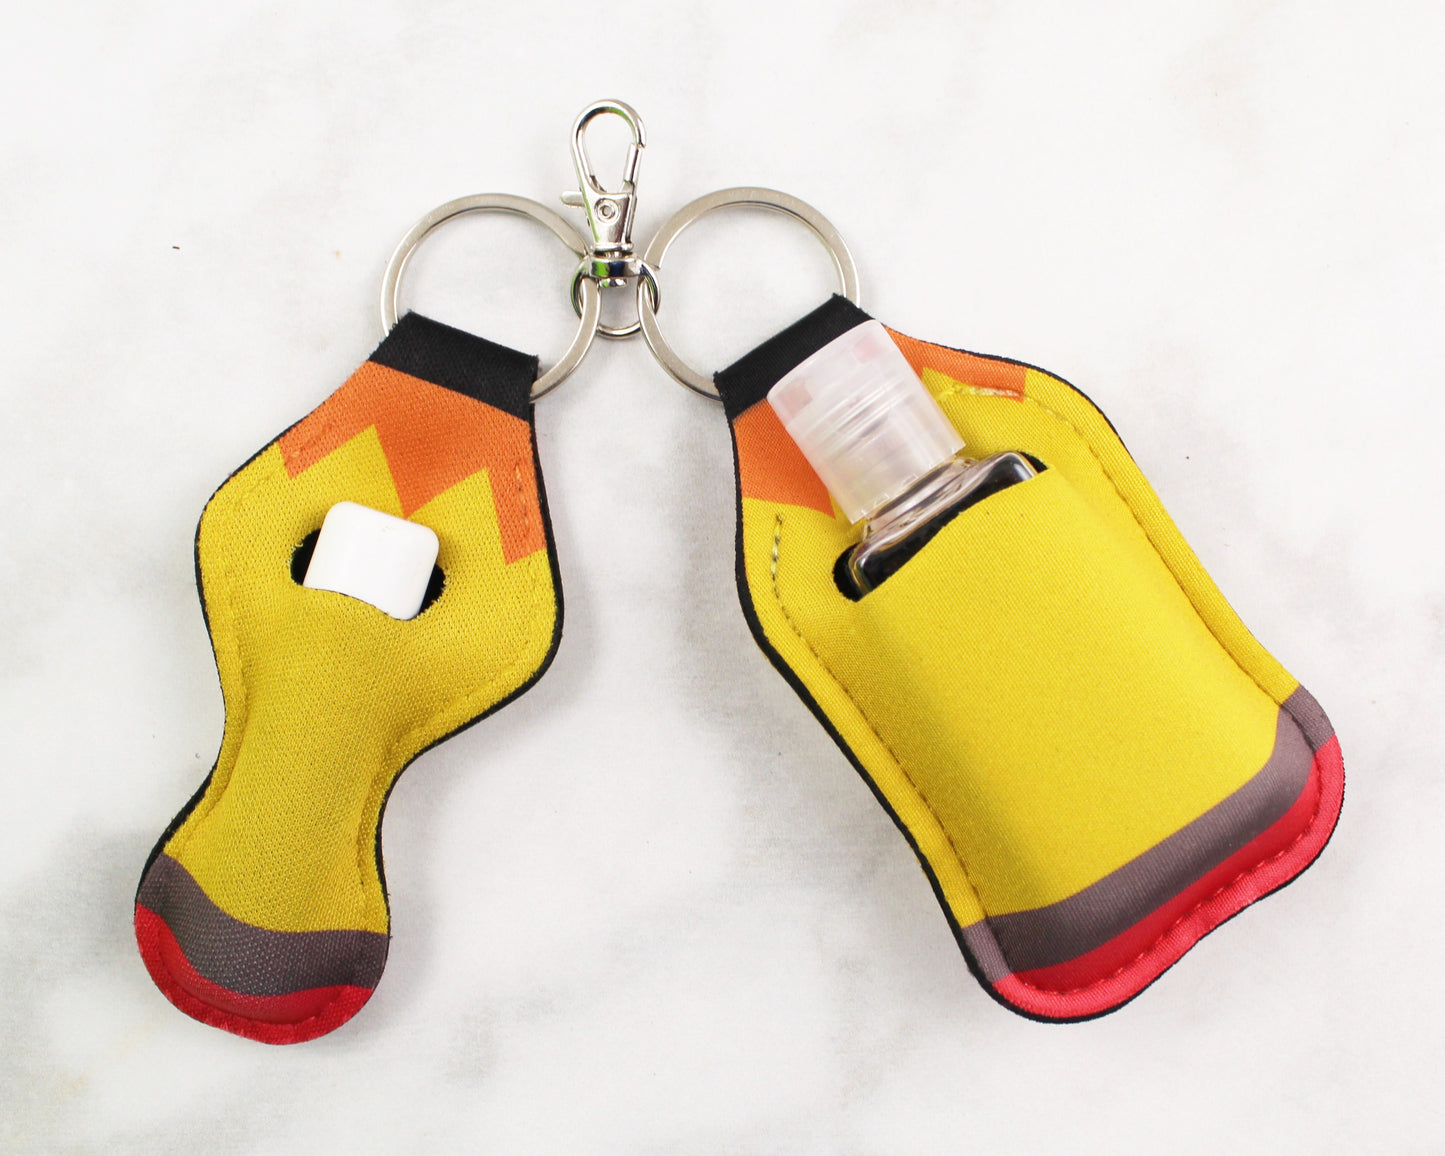 Pencil Hand Sanitizer and Lip Balm Holders